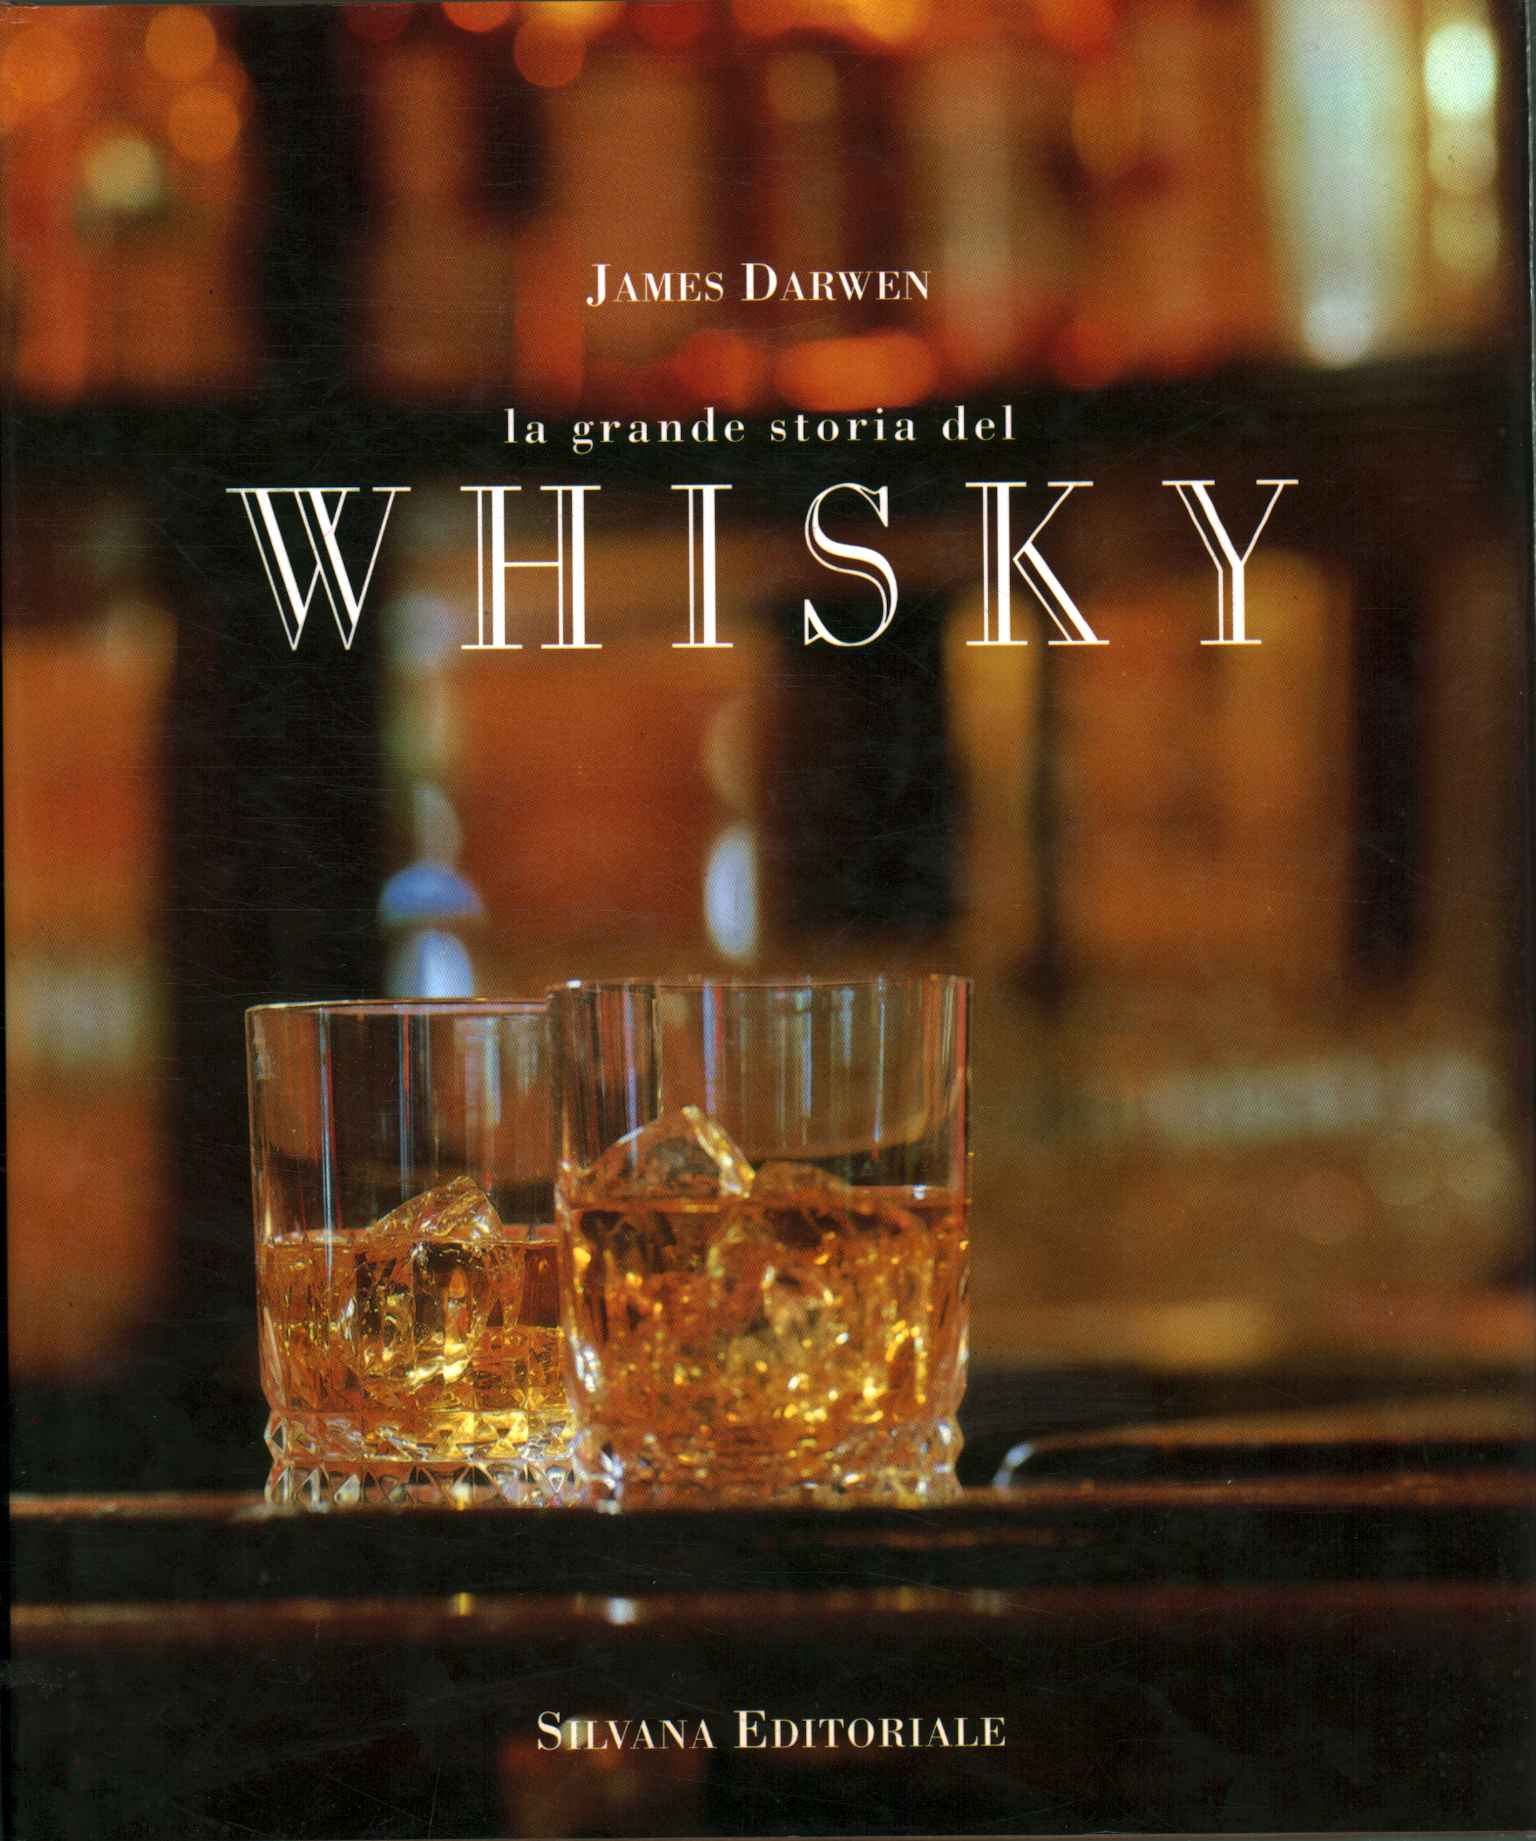 The great history of whisky